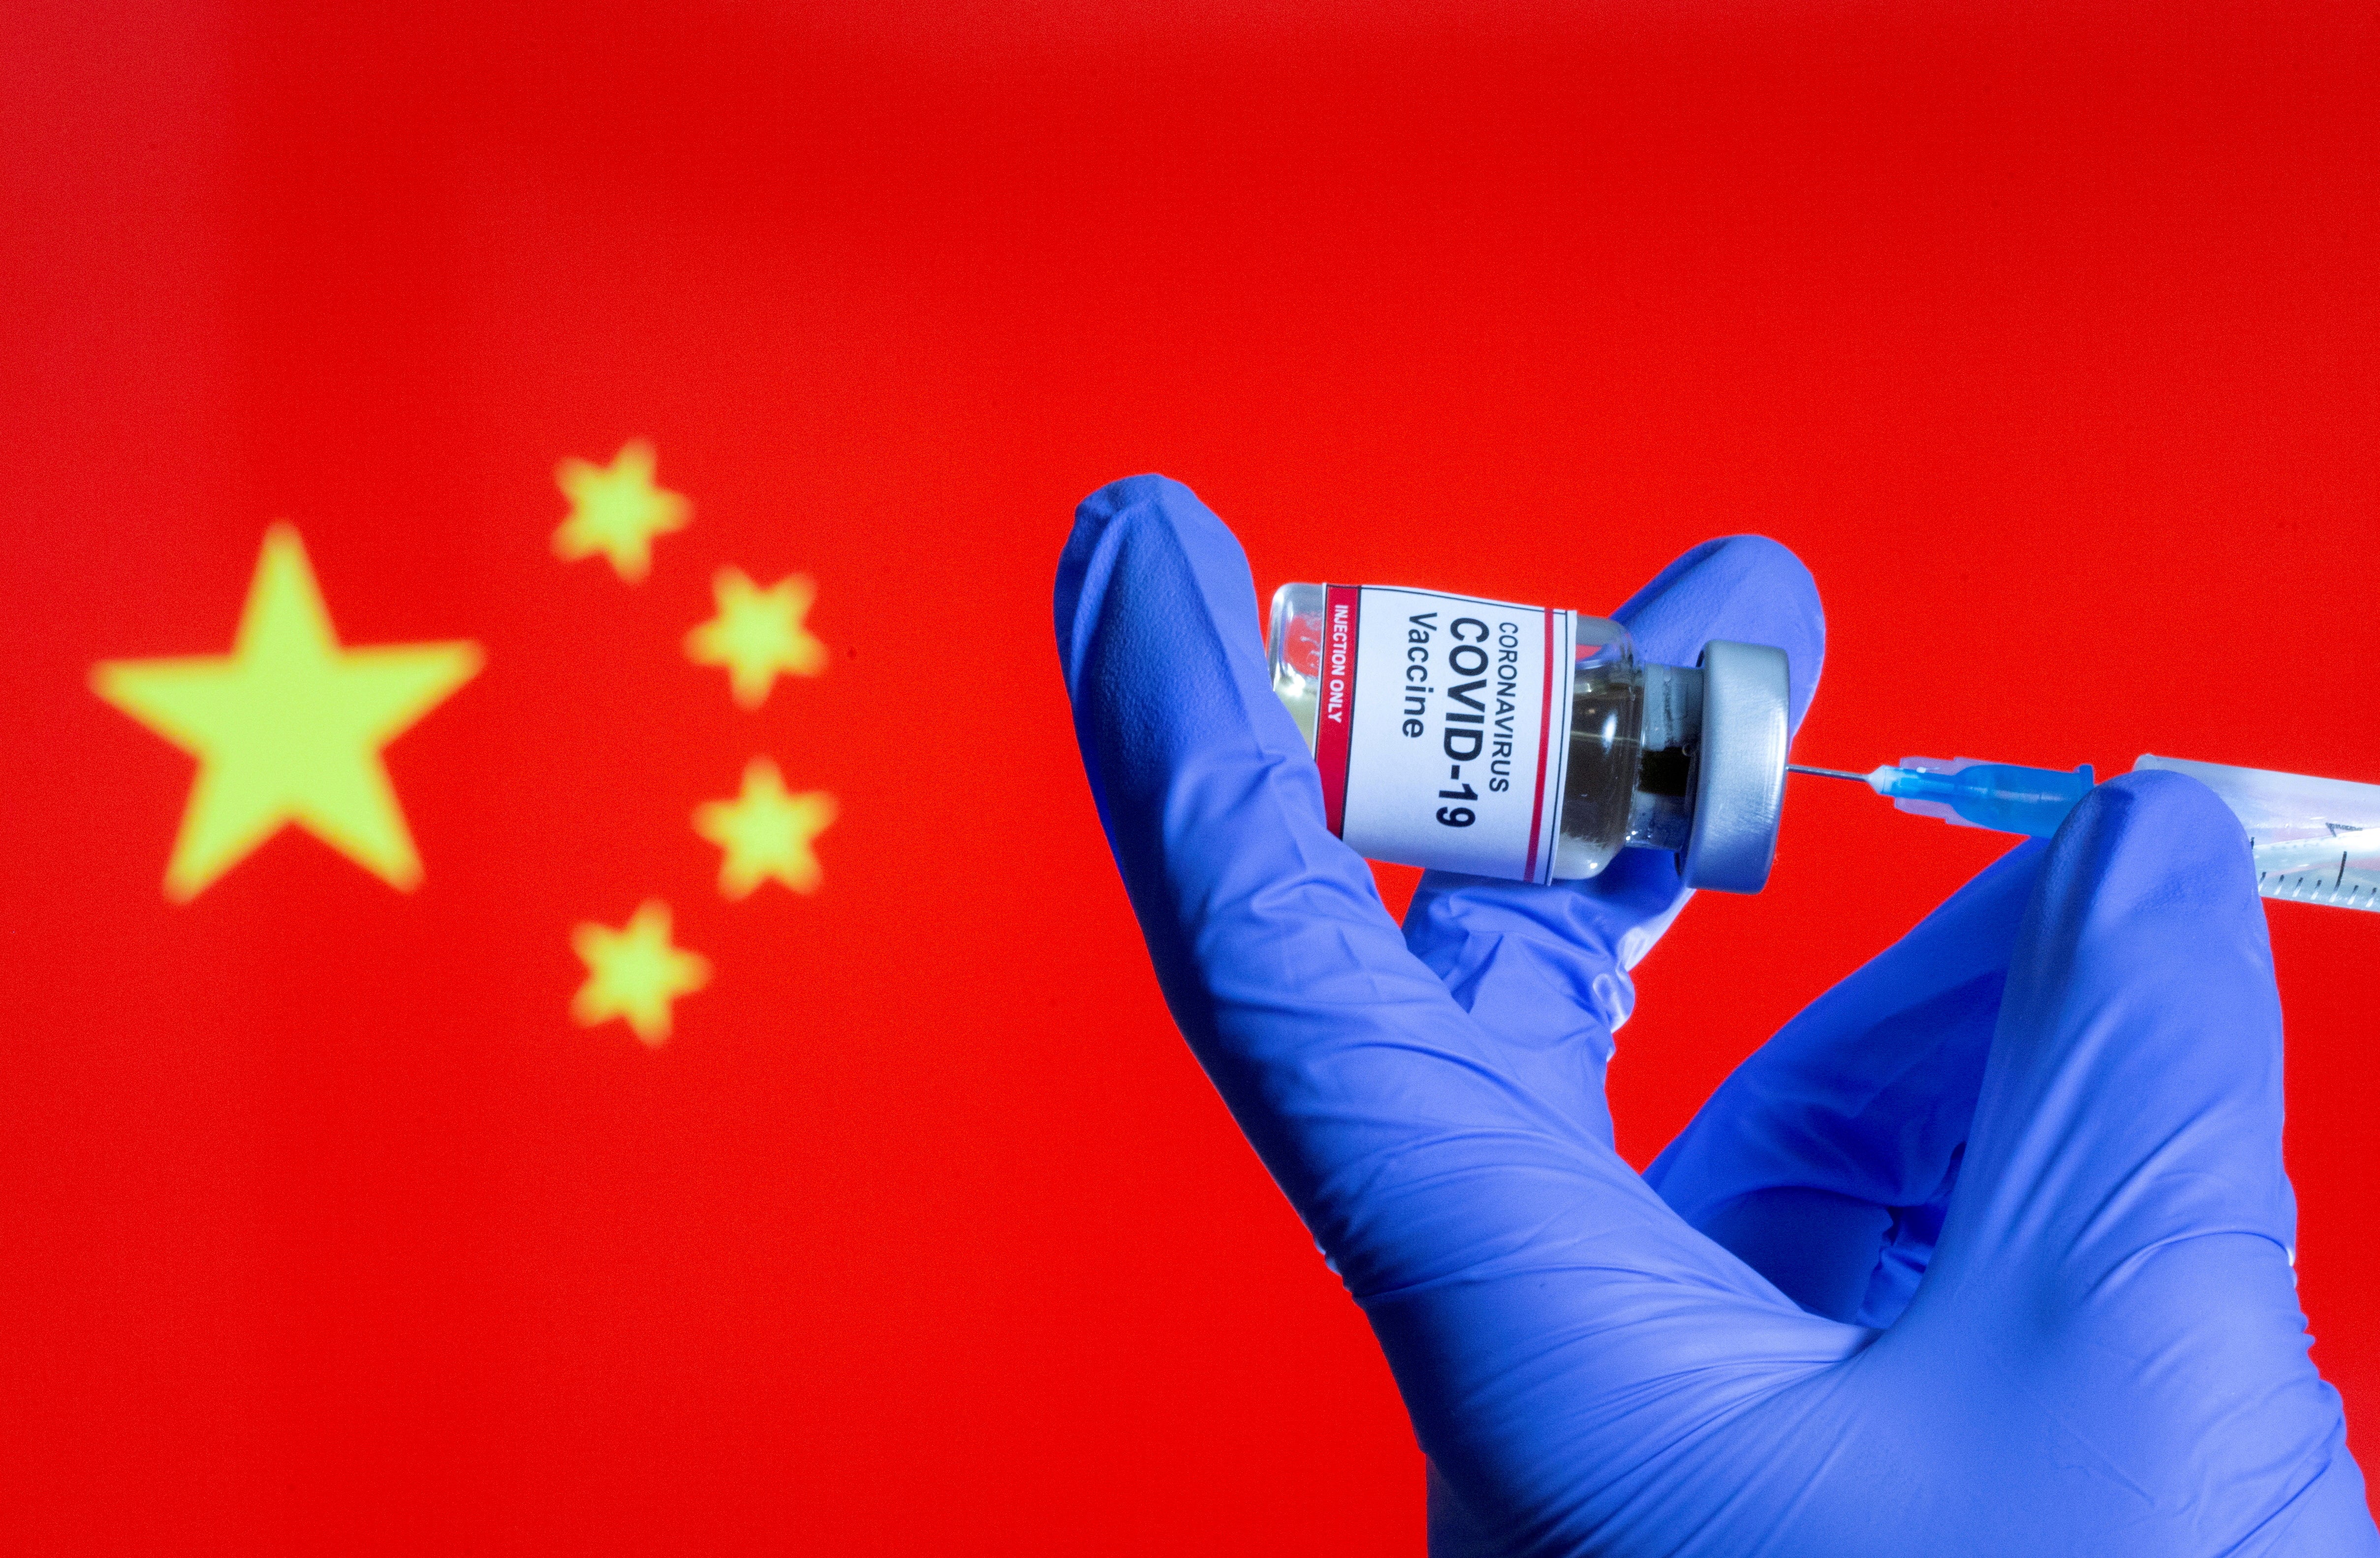 China has pushed its ‘vaccine diplomacy’ campaign in exchange for diplomatic benefits